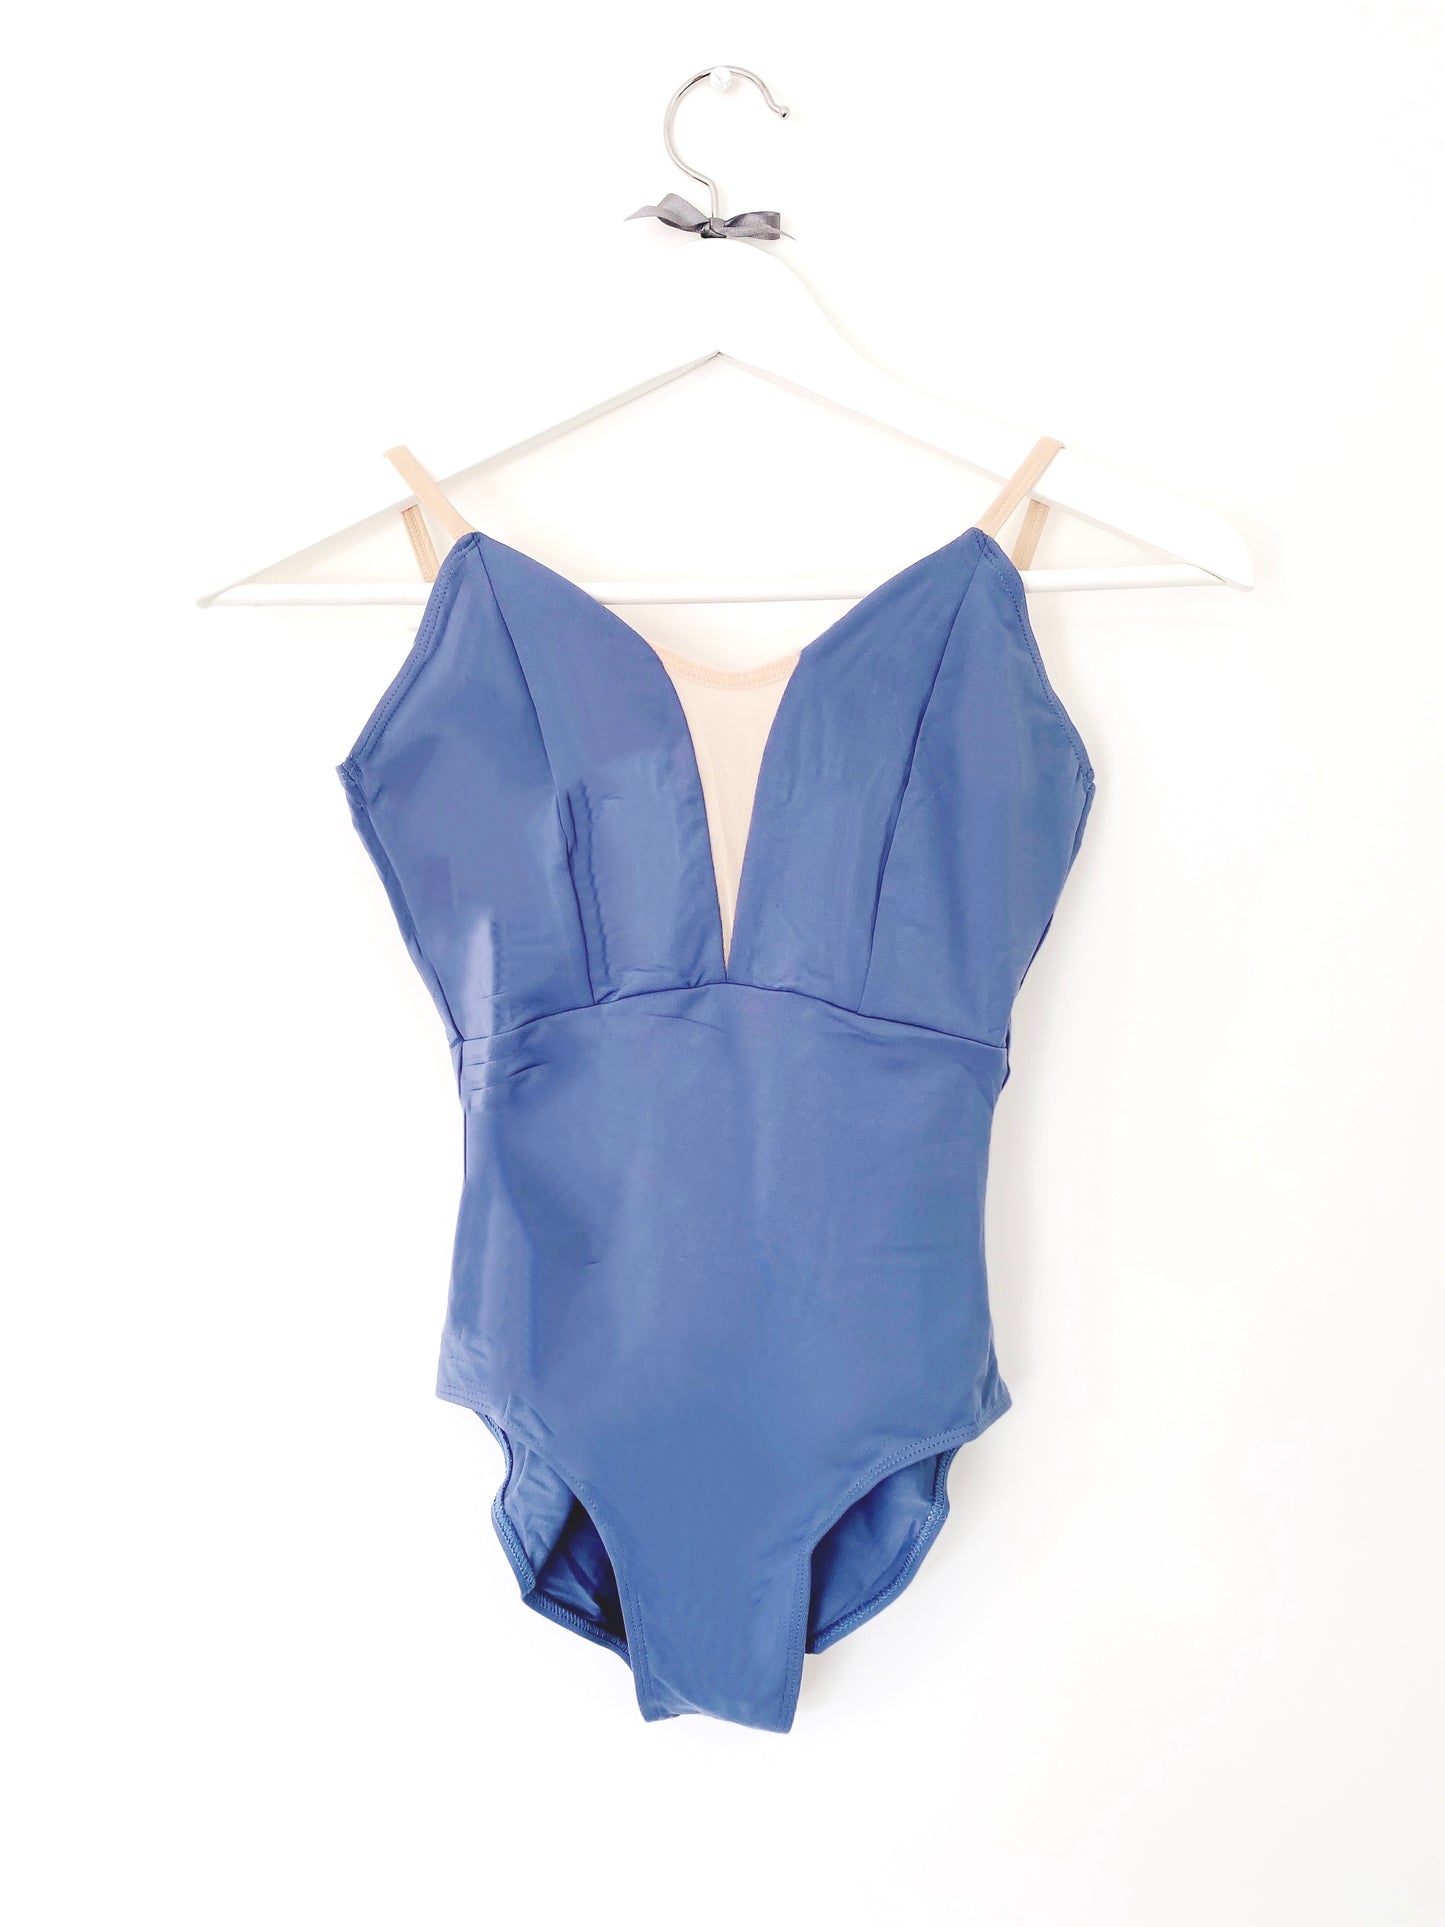 V-mesh camisole leotard in lavender blue with a deep back from the collective dancewear